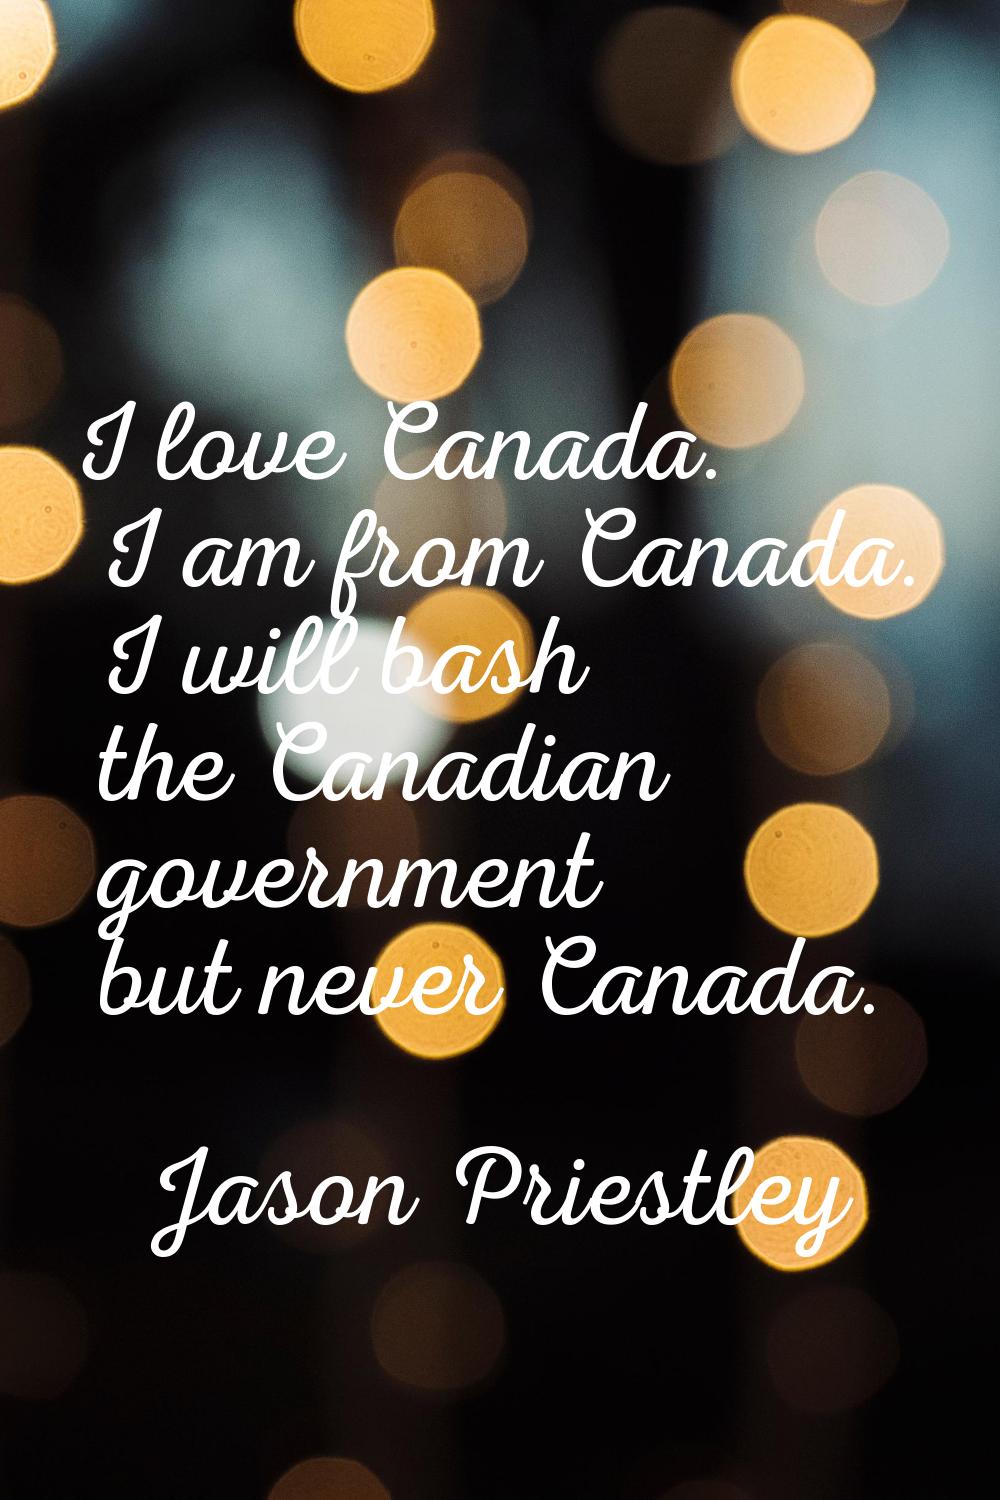 I love Canada. I am from Canada. I will bash the Canadian government but never Canada.